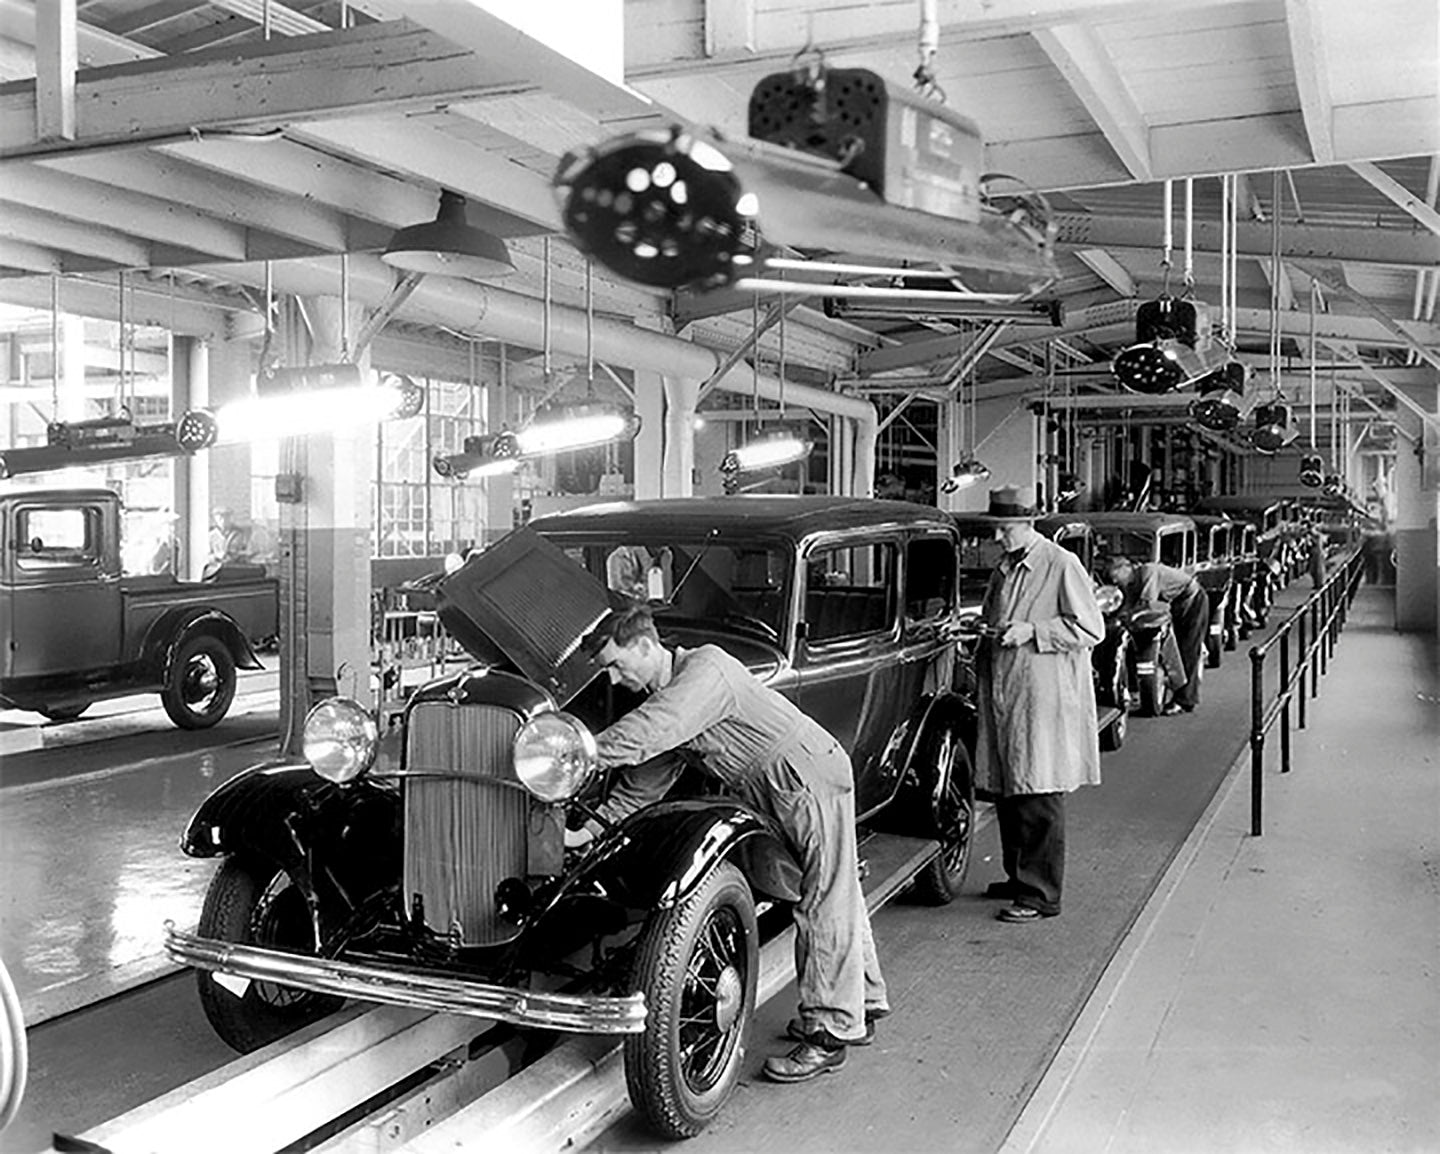 Ford Motor Company assembly line - Officially Licensed Detroit News Metal Print